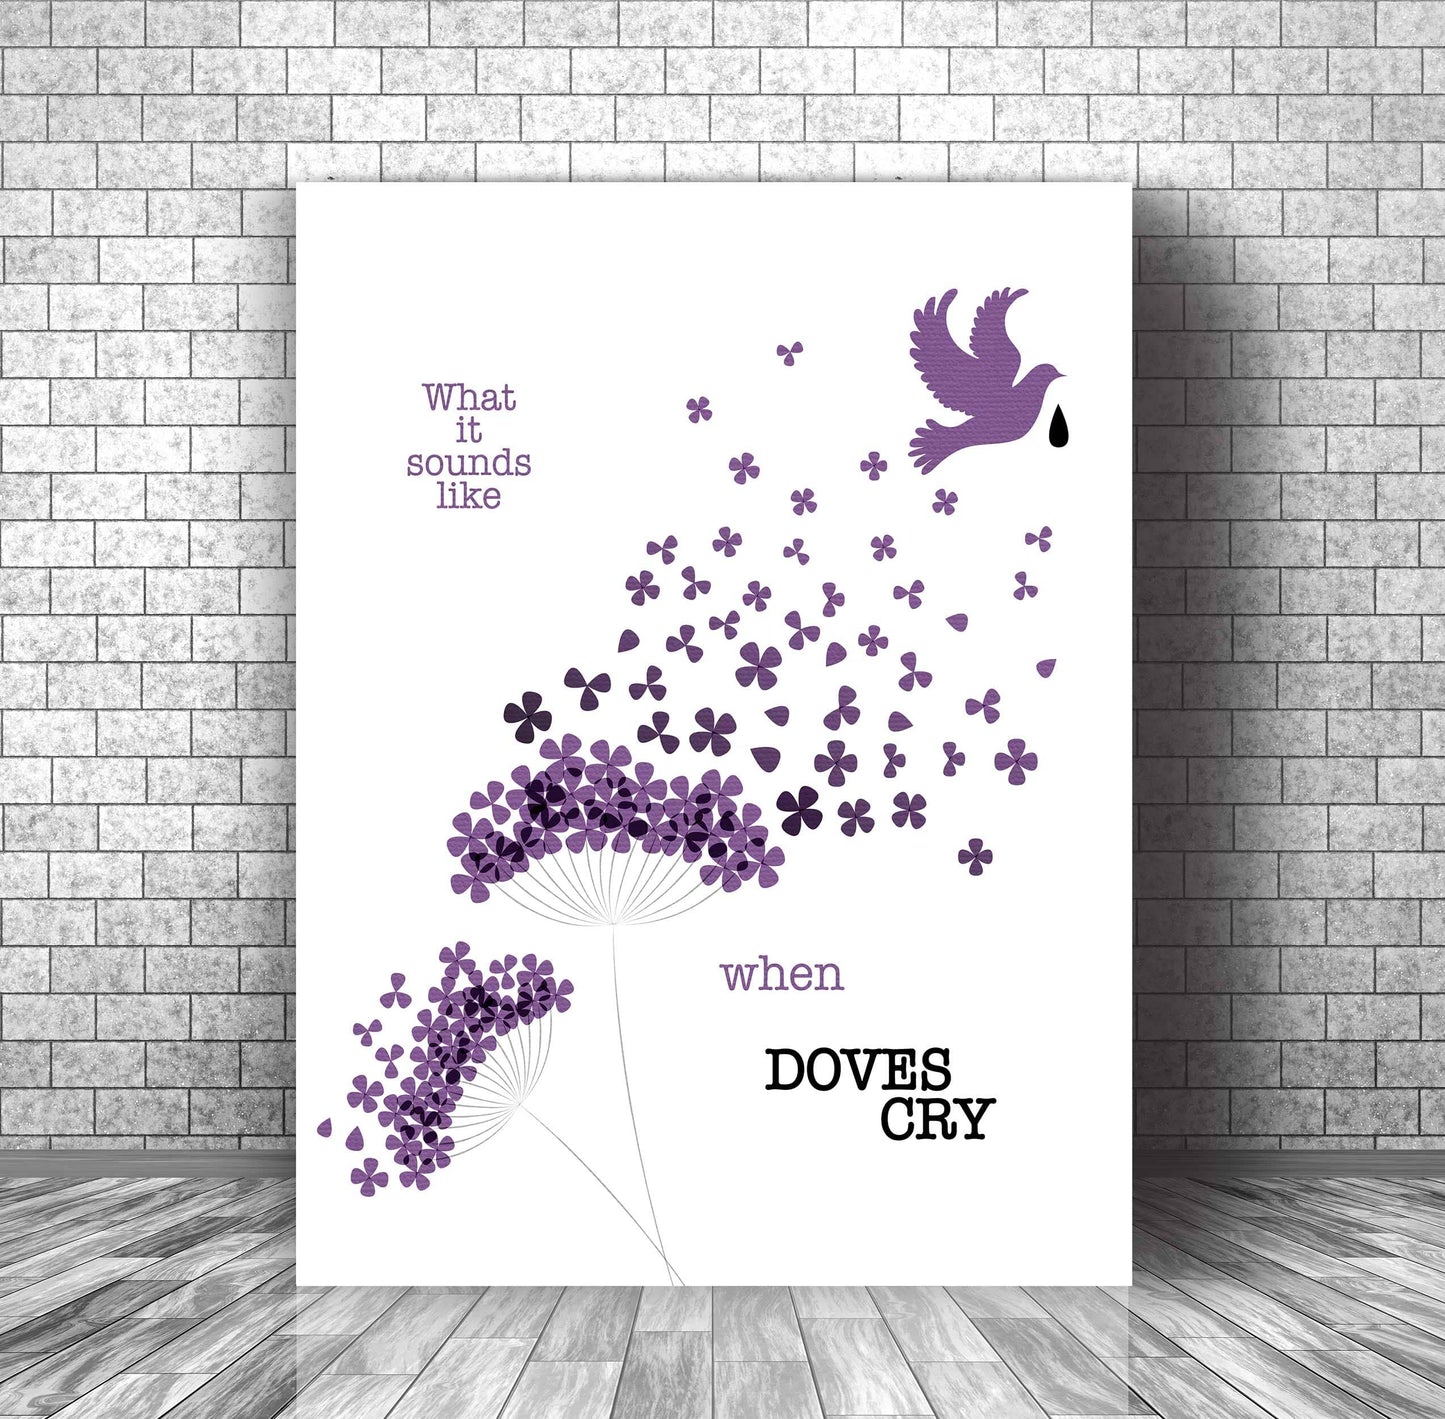 When Doves Cry by Prince - Song Lyrics Wall Art Print Poster Song Lyrics Art Song Lyrics Art 11x14 Canvas Wrap 